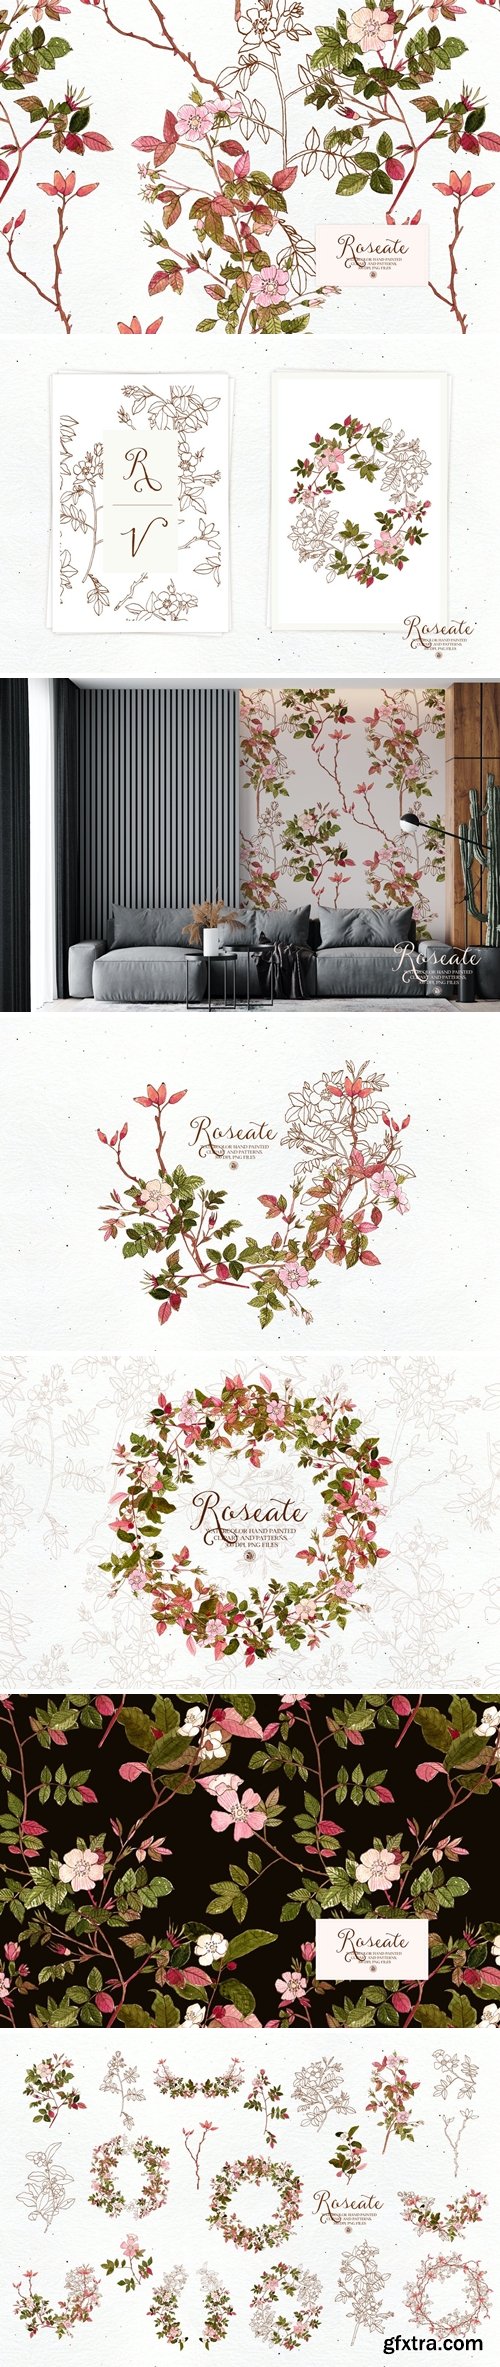 Roseate - watercolor clipart and patterns